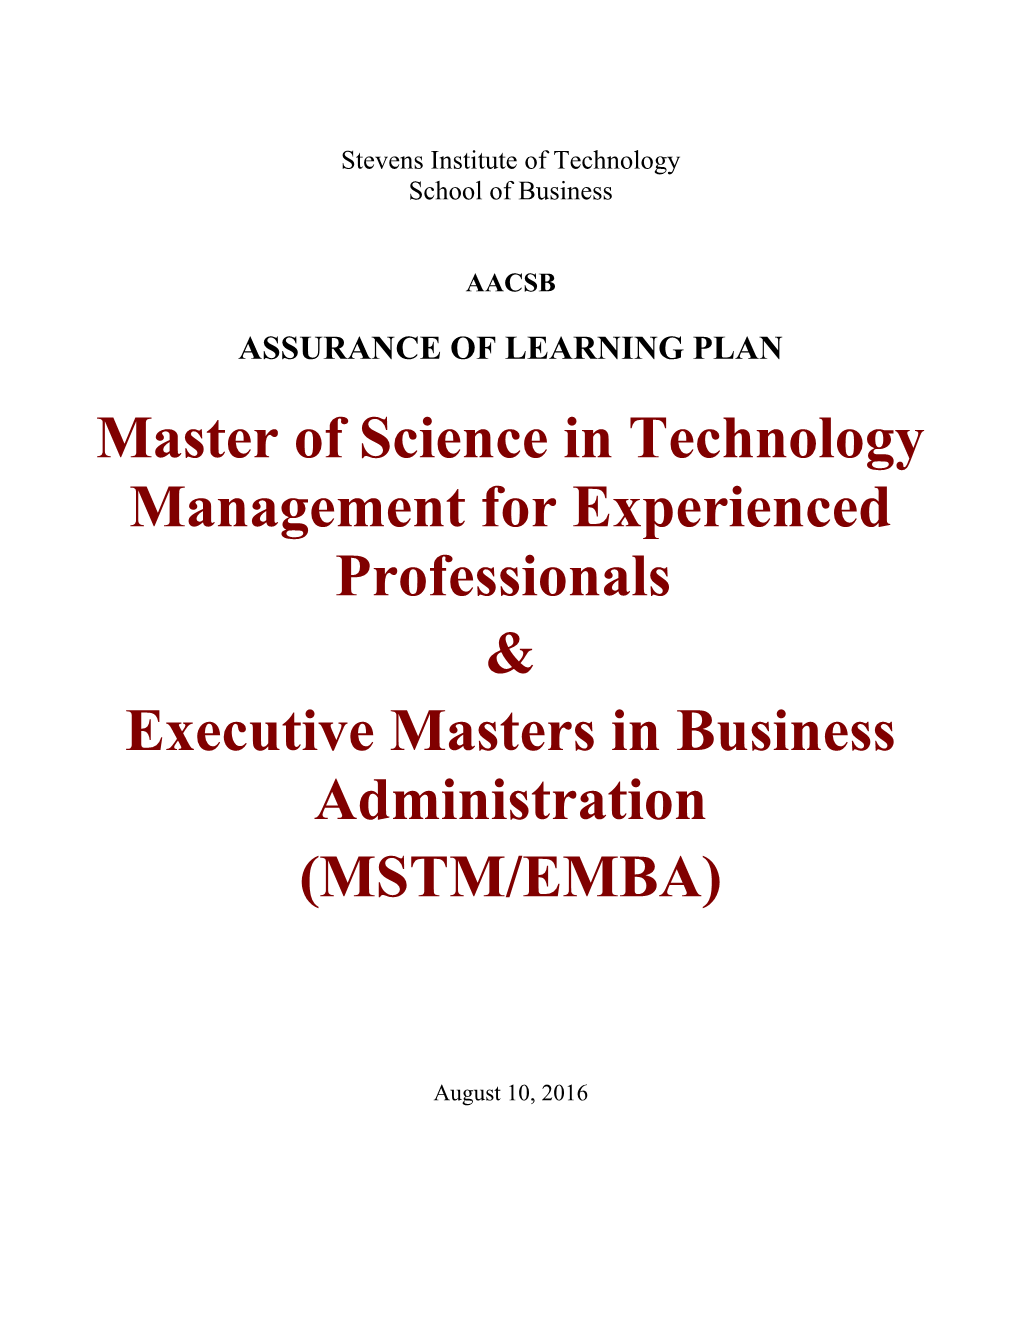 Master of Science in Technology Management for Experienced Professionals